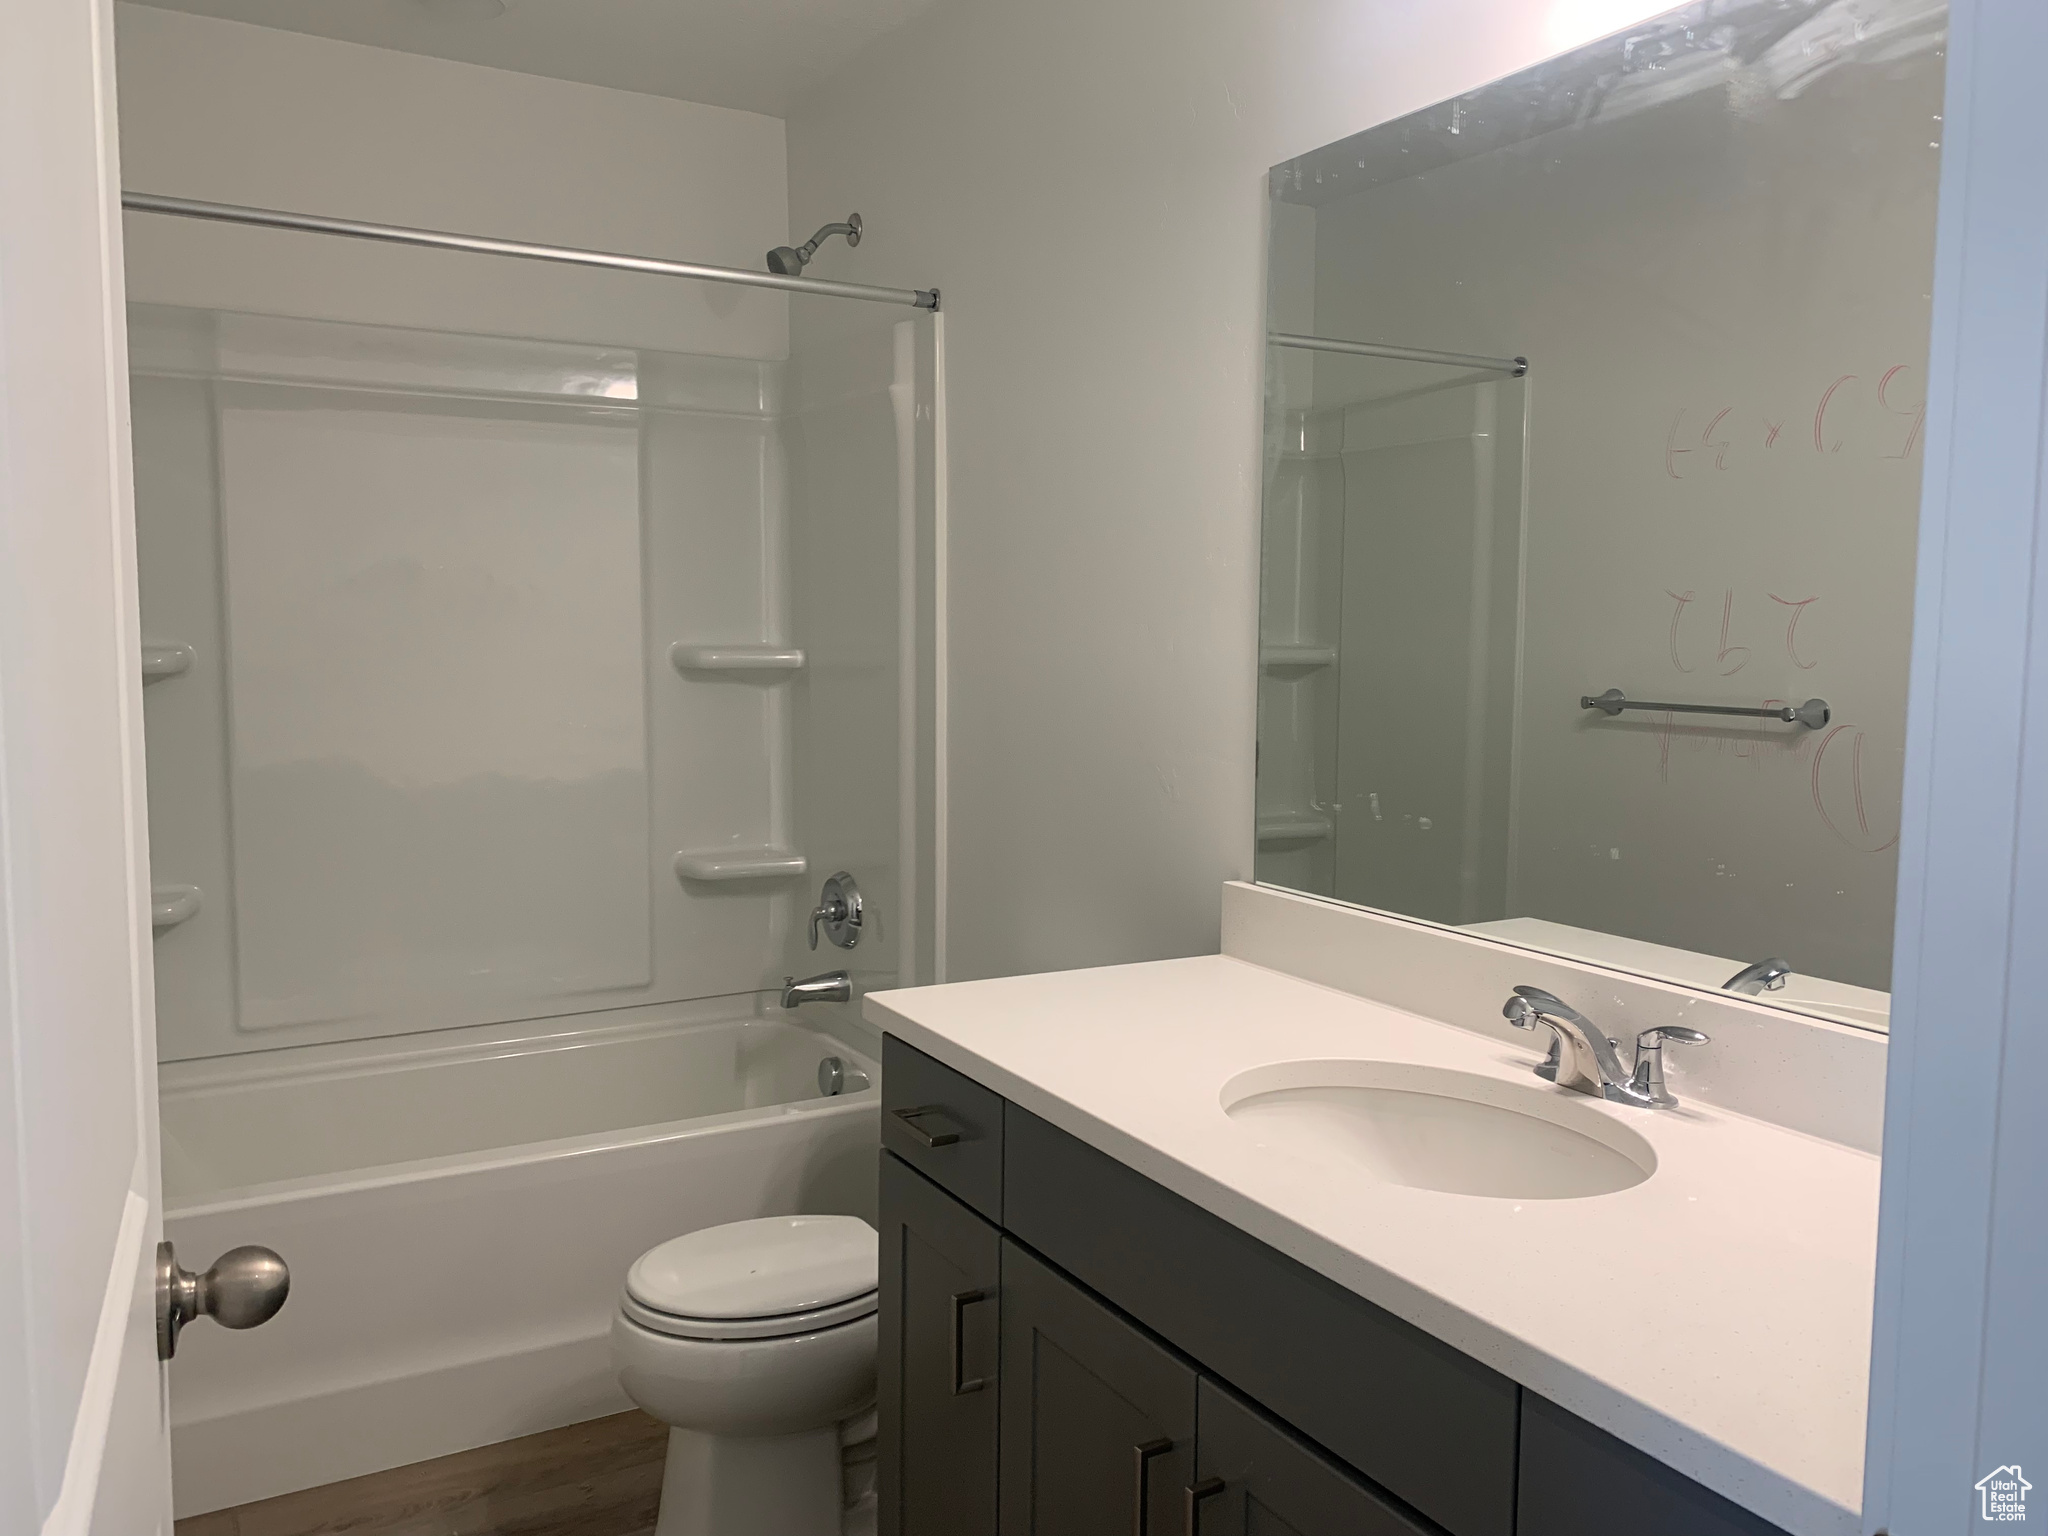 Full bathroom with shower / bathing tub combination, wood-type flooring, toilet, and vanity with extensive cabinet space